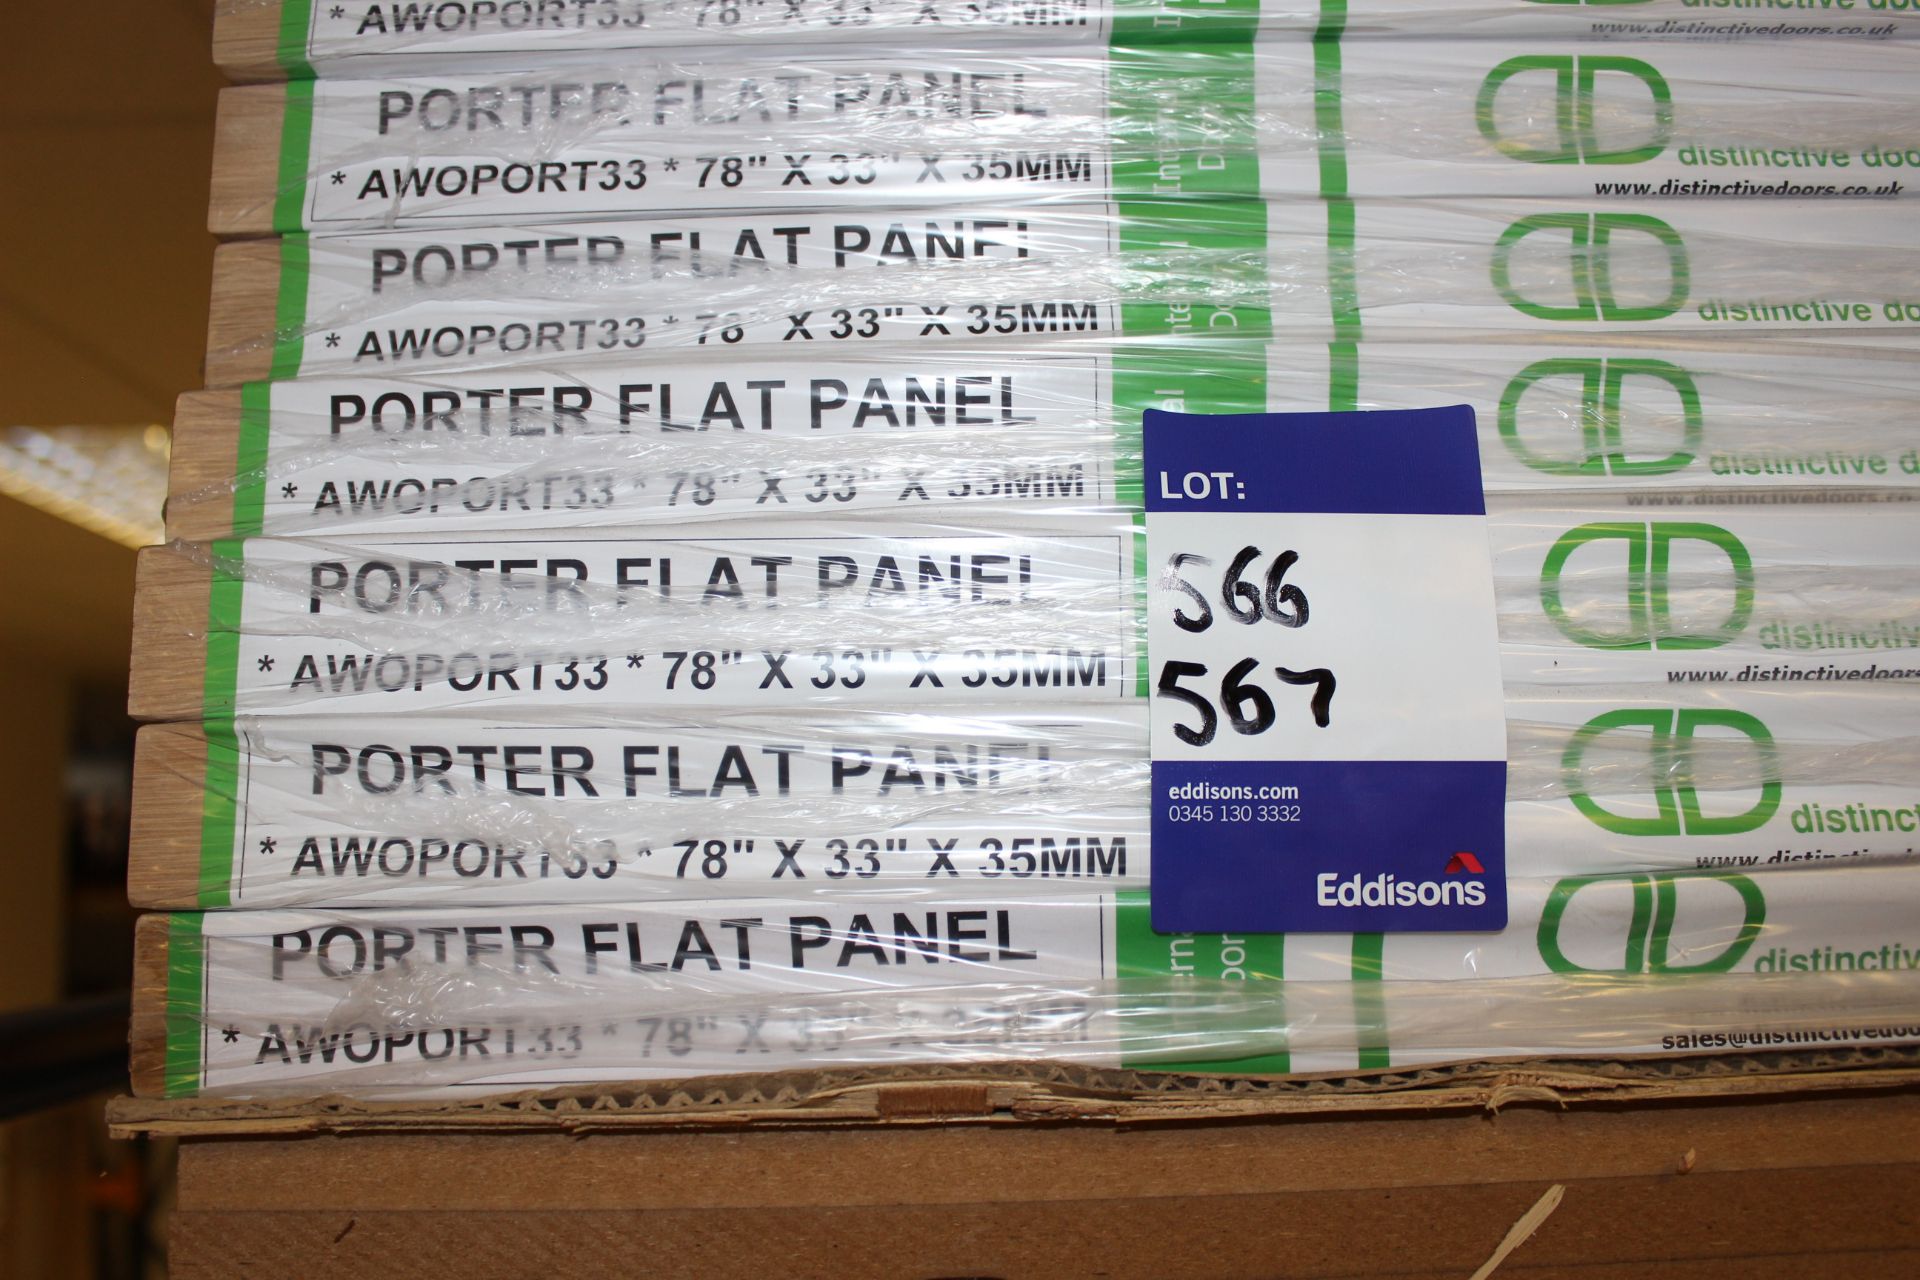 10 x Porter Flat Panel AWOPORT33 78”x33”x35mm Internal Door - Lots to be handed out in order they - Image 2 of 3